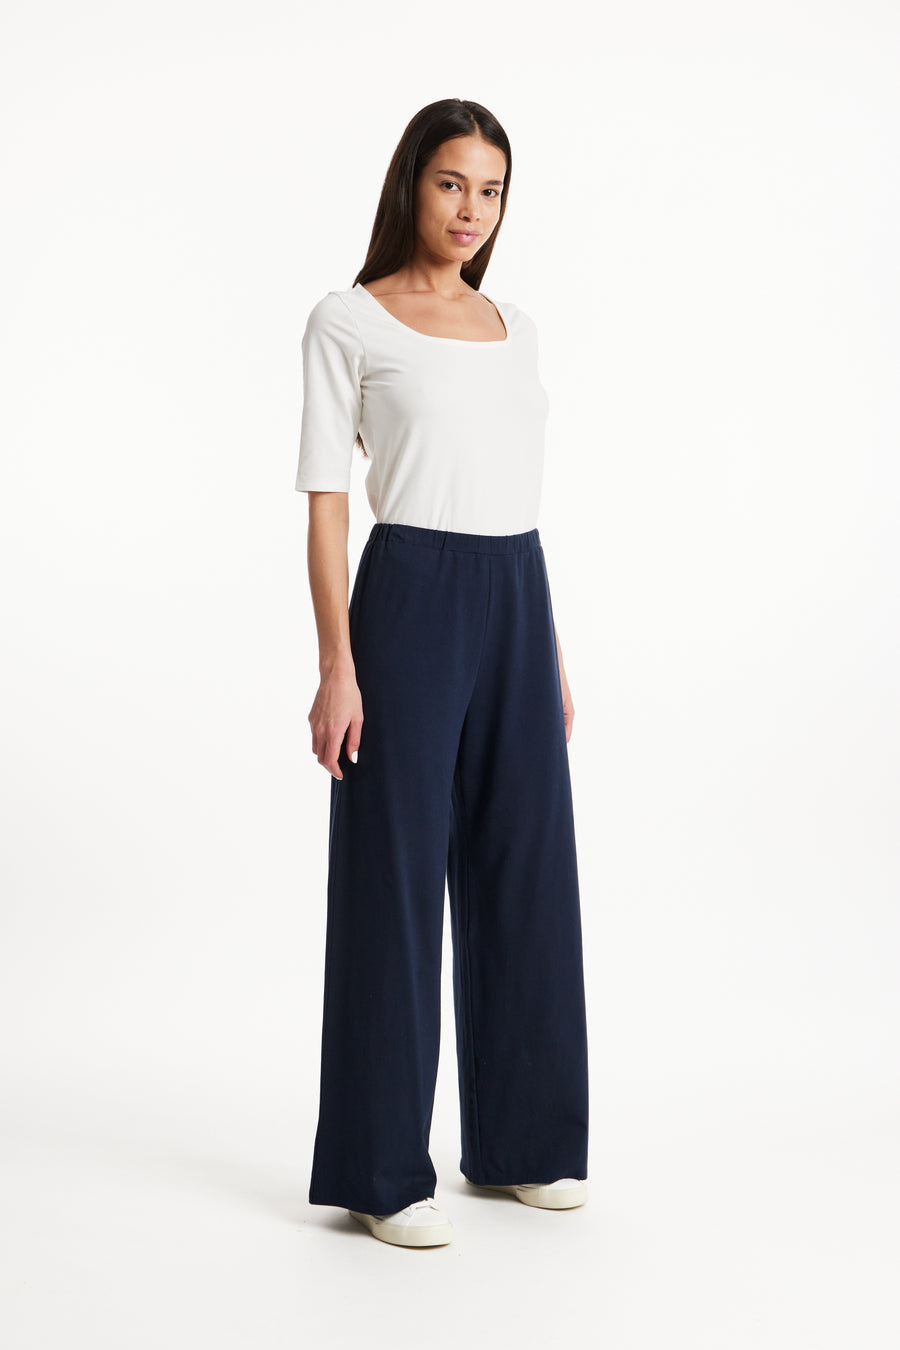 People Tree Fair Trade, Ethical & Sustainable Jacinta trousers in Navy 95% organic certified cotton, 5% elastane